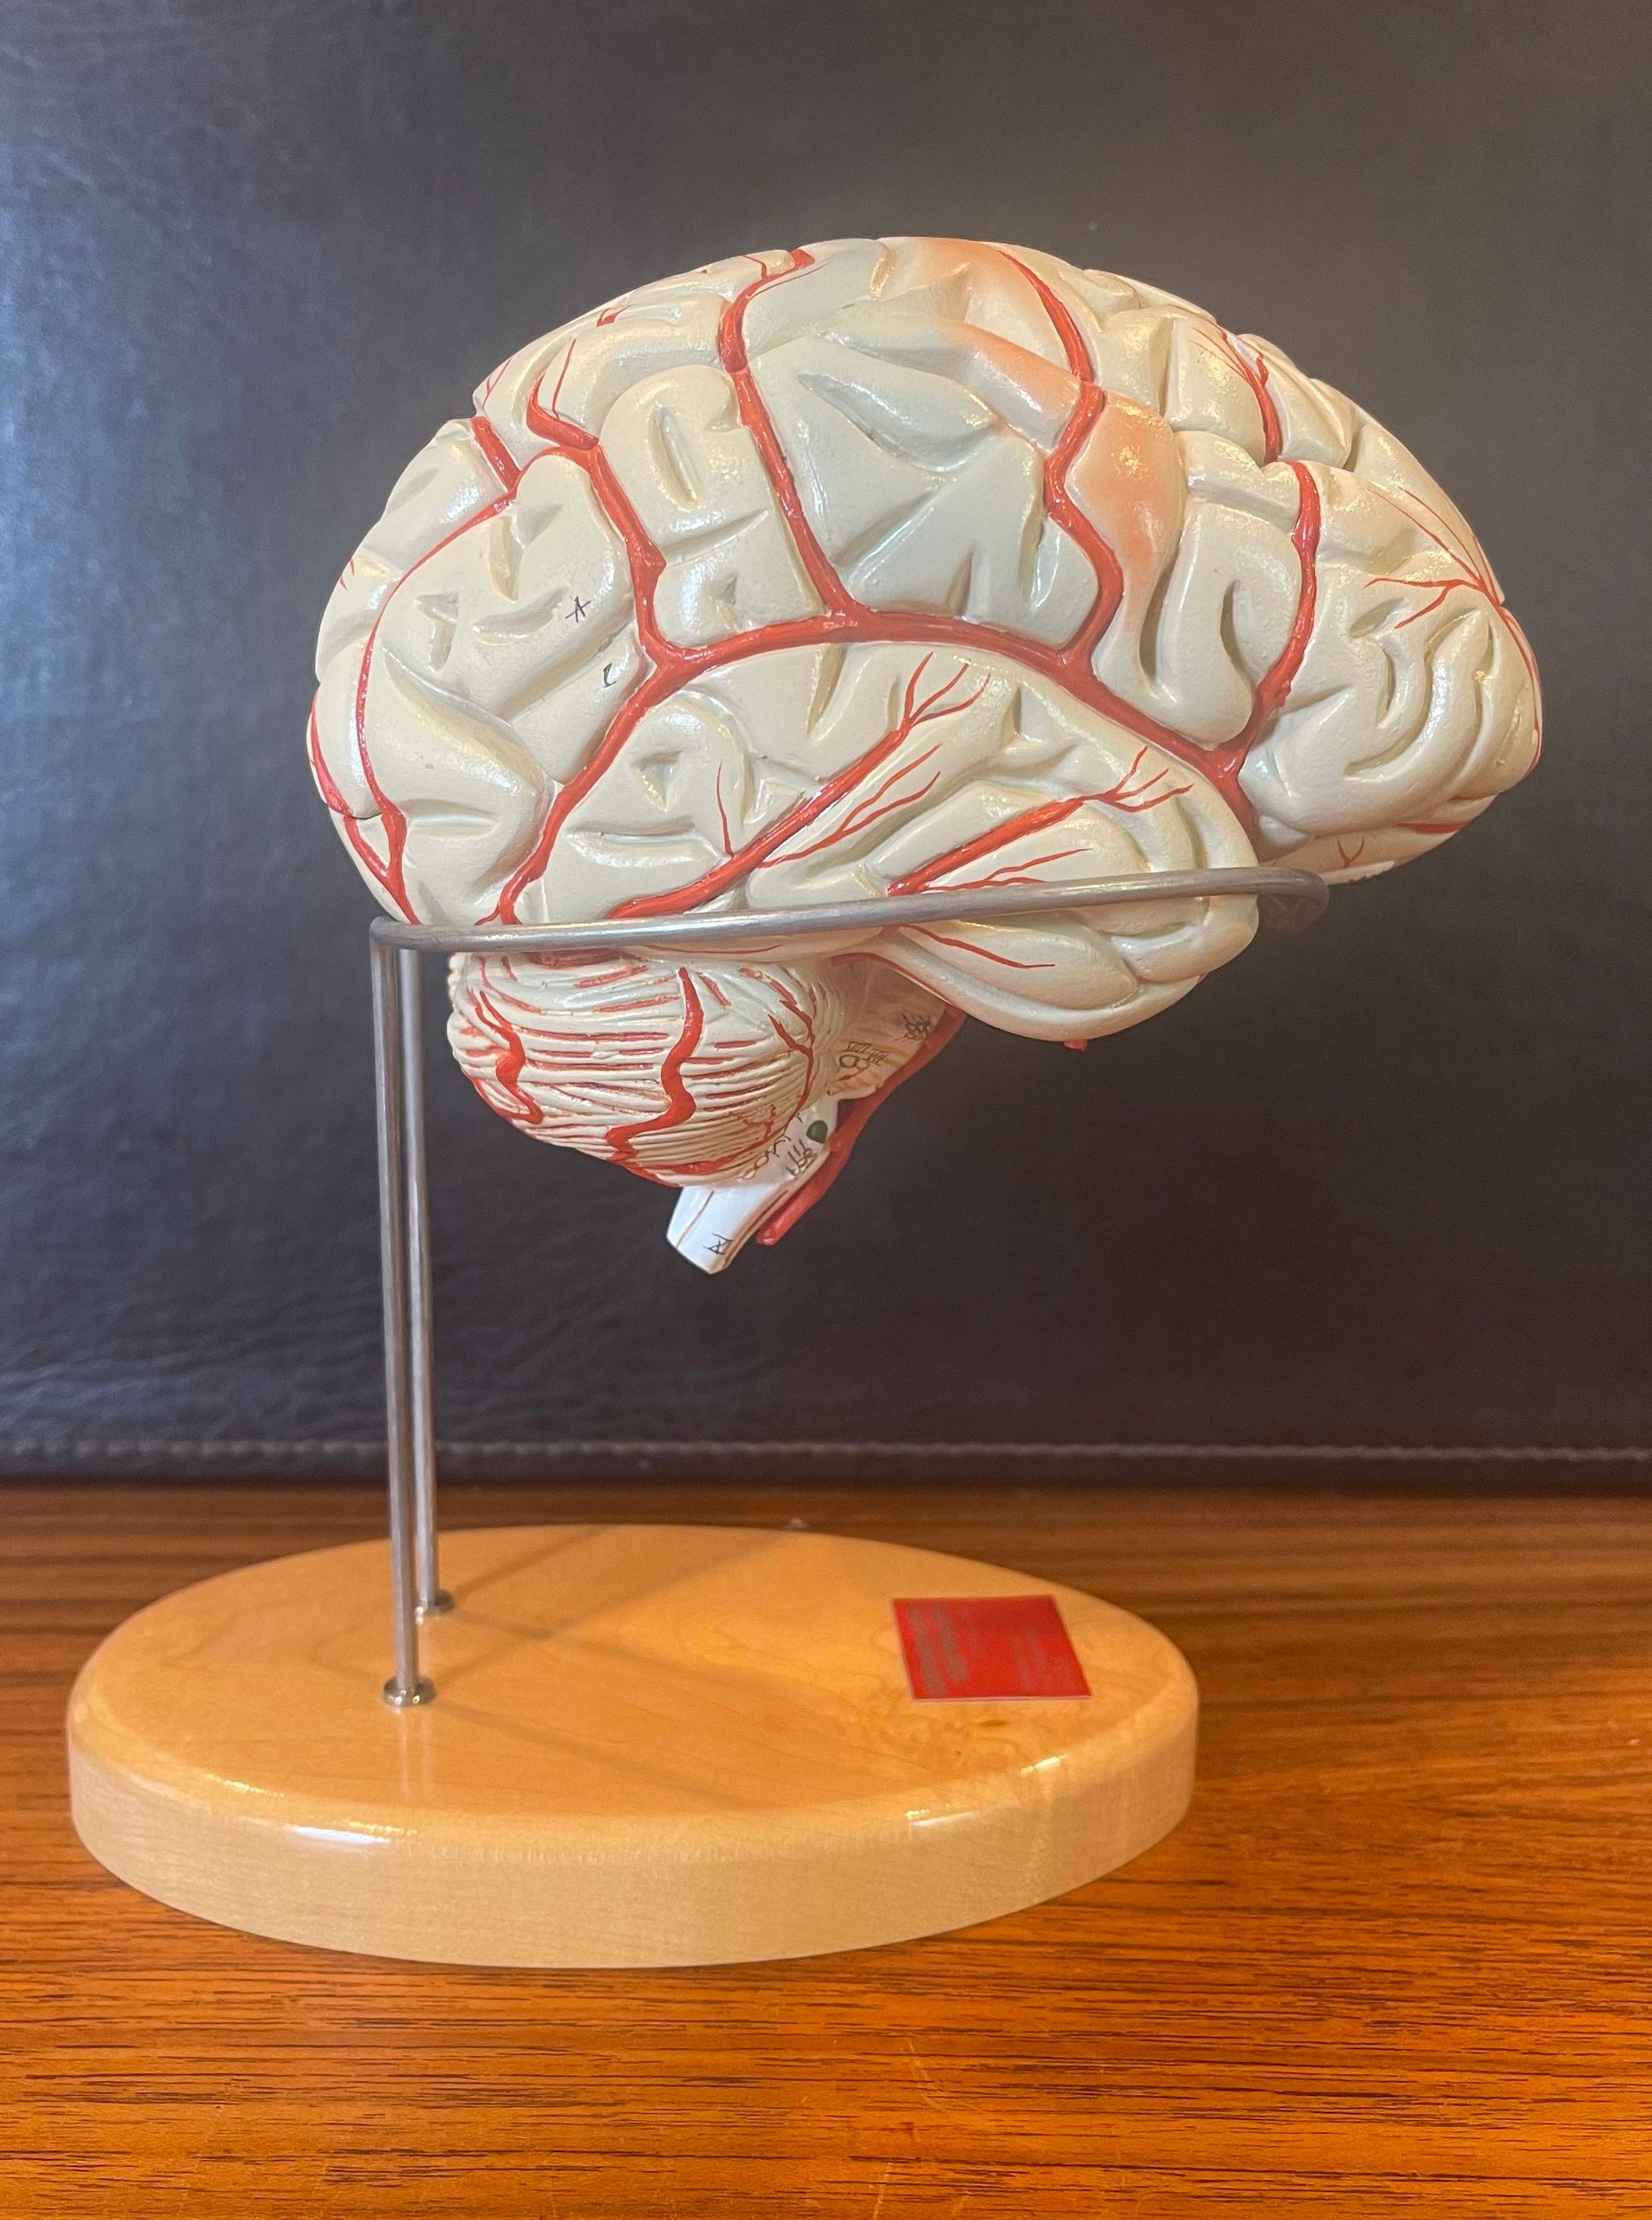 Vintage hand painted brain model on stand by Denoyer-Geppert, circa 1990s. The model consists of eight pieces of molded, nonbreakable, vinyl that are connected by steel pins; it won’t disassemble until pulled apart. Regions and centers receptive to